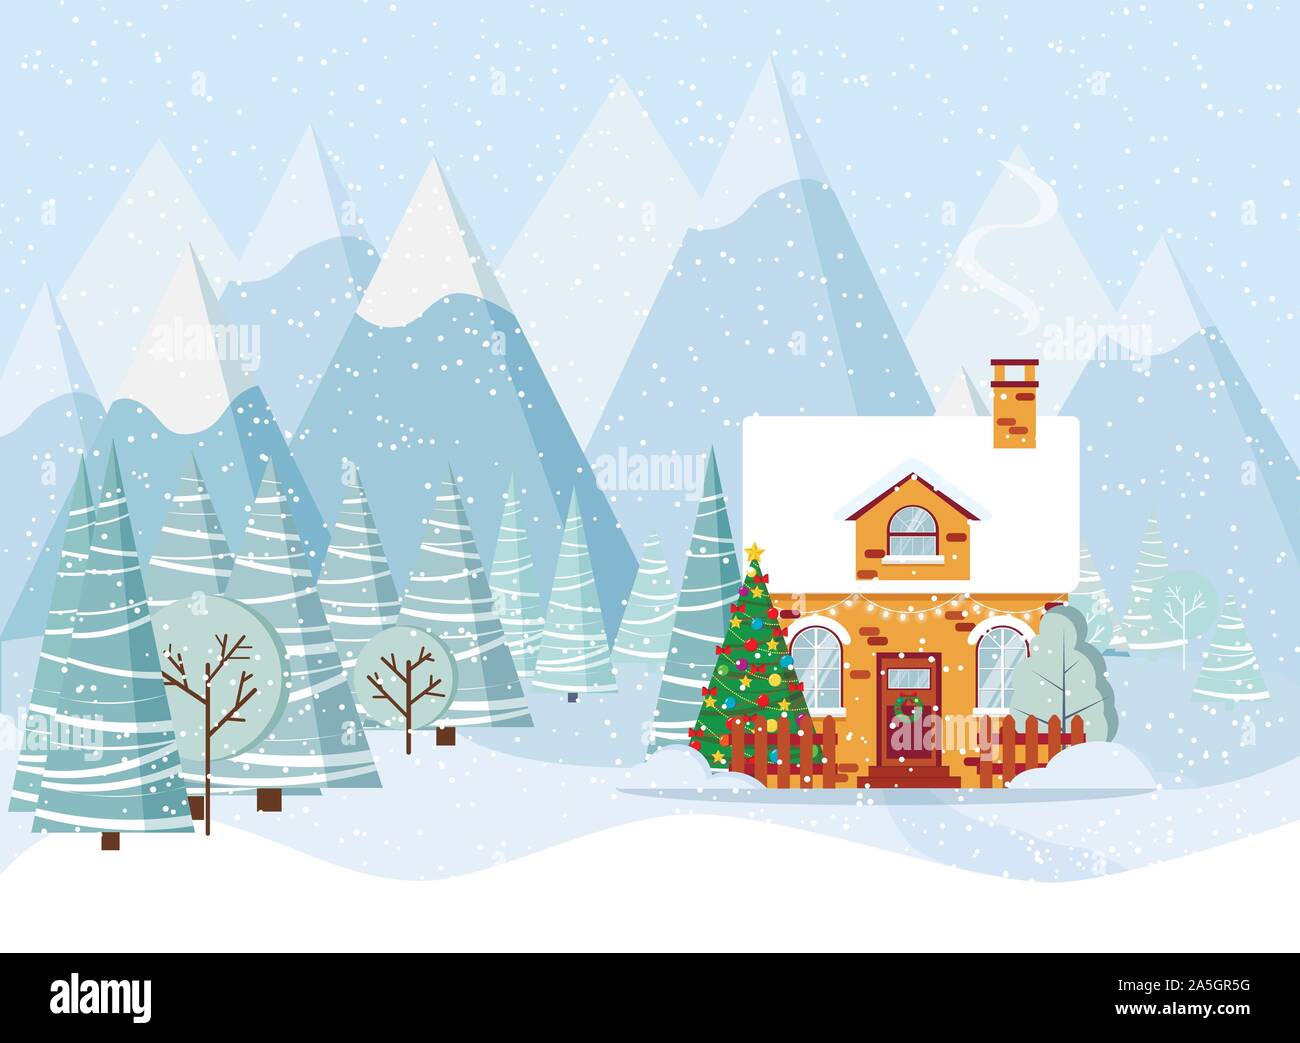 Winter Mountain Landscape With Christmas House Covered With Snow Decorated Christmas Tree Spruces In Cartoon Flat Style Stock Vector Image Art Alamy